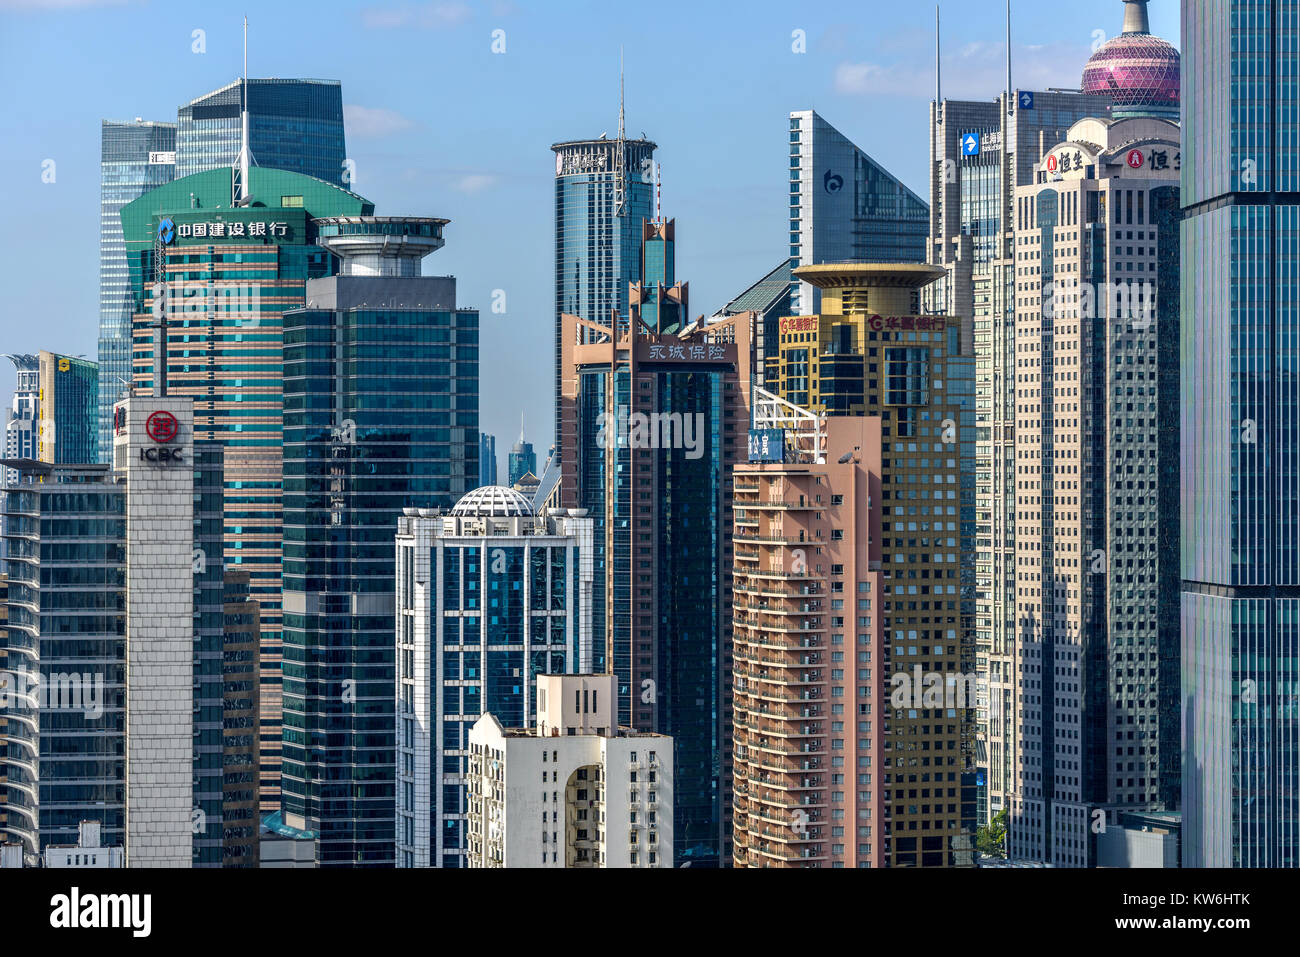 Crowded Shanghai Skyline - A closeup view of crowded modern office and residential buildings with sunny blue sky in Lujiazui, Pudong, Shanghai, China. Stock Photo